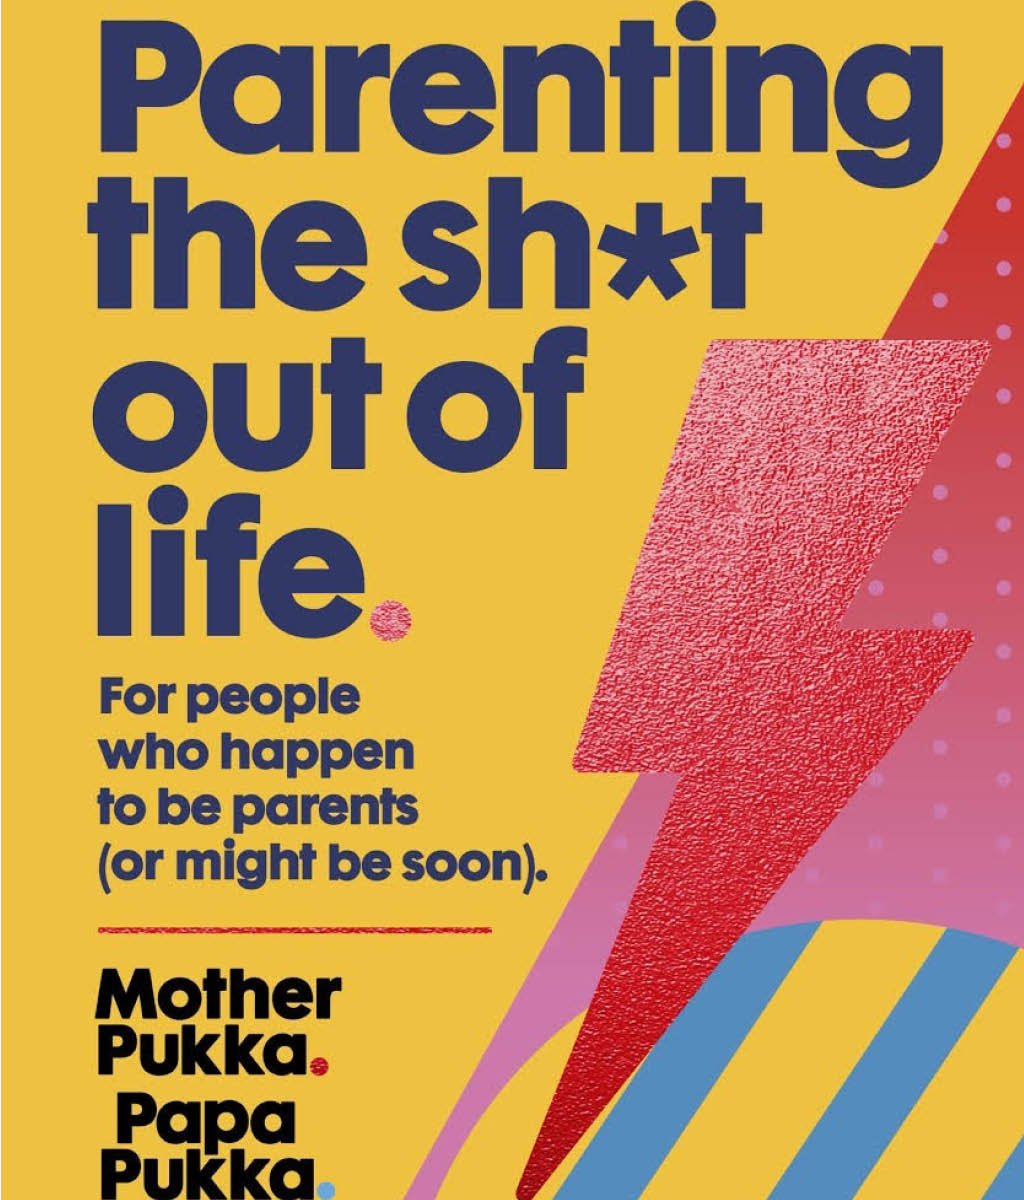 Parenting the Sh*t Out Of Life: For people who happen to be parents (or might be soon) Mother Pukka, Papa Pukka